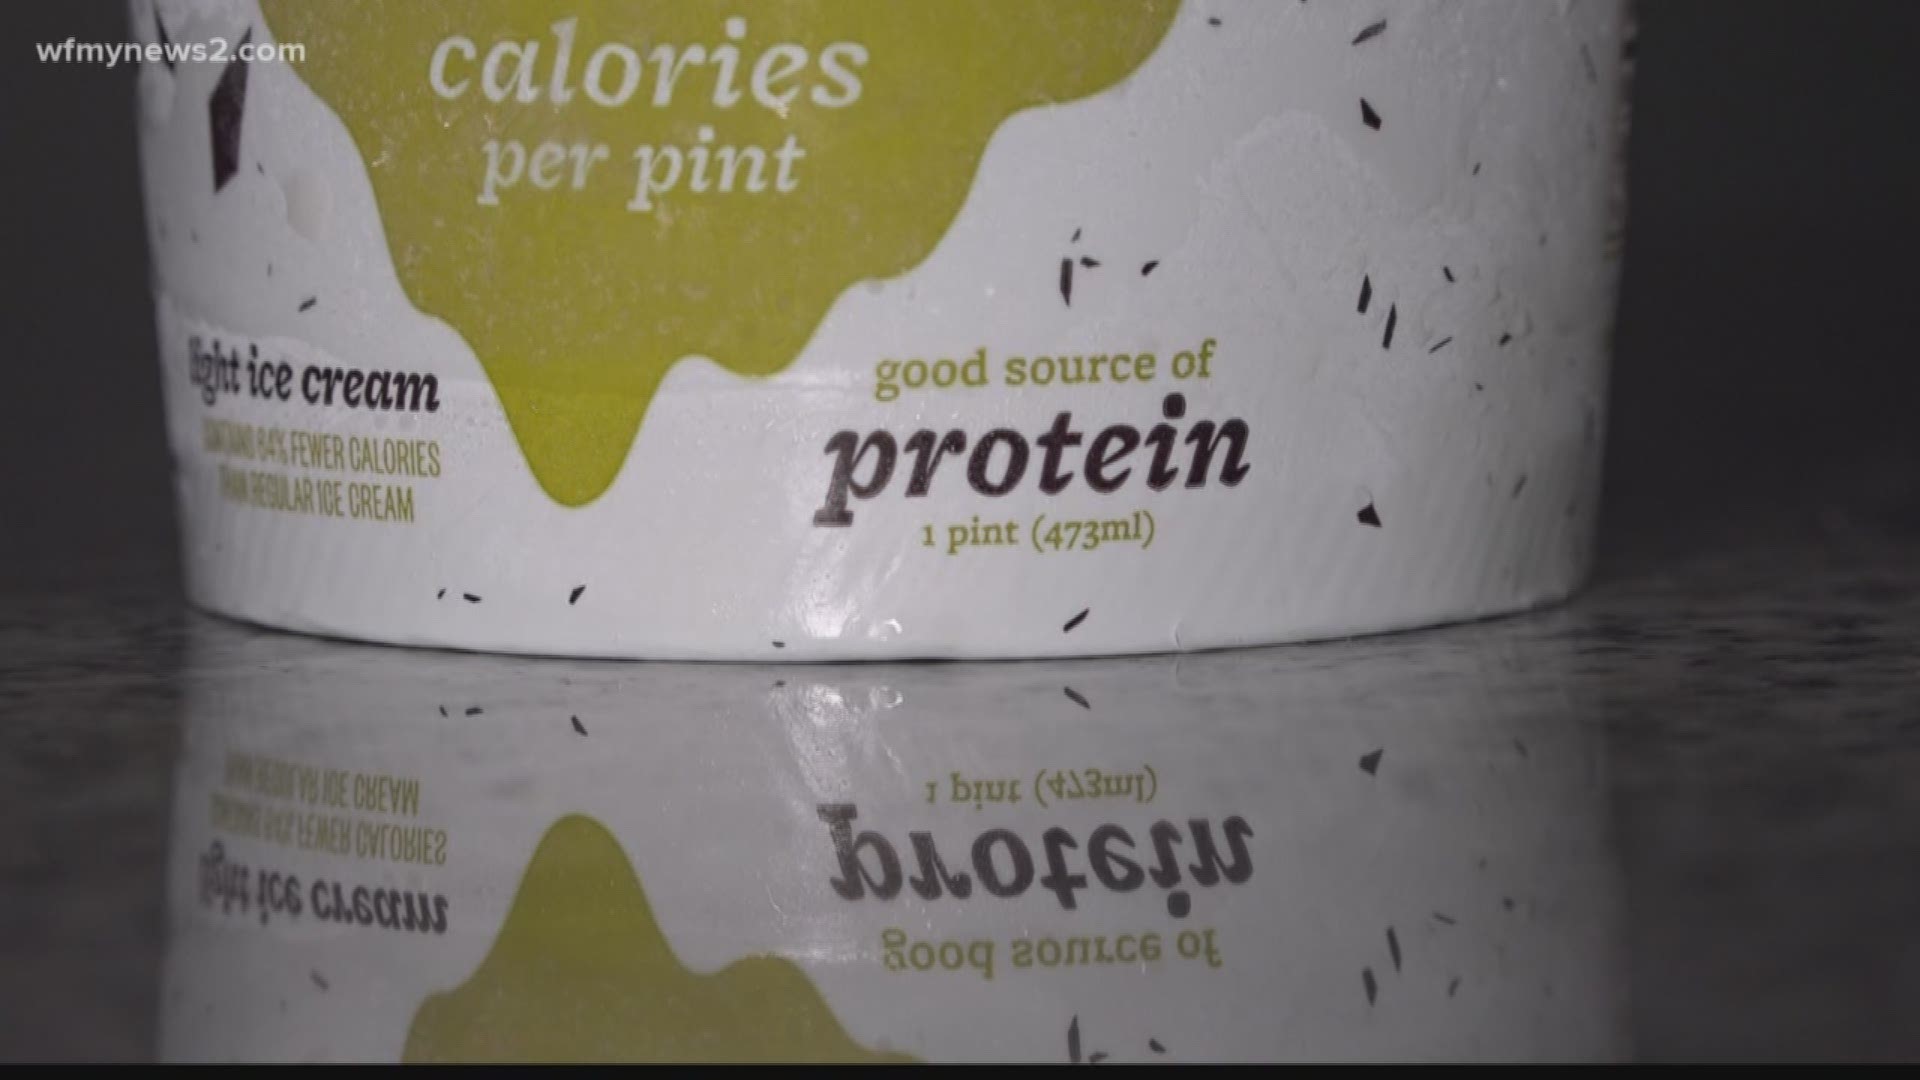 Is Low-Calorie, High-Protein Ice Cream Healthy?